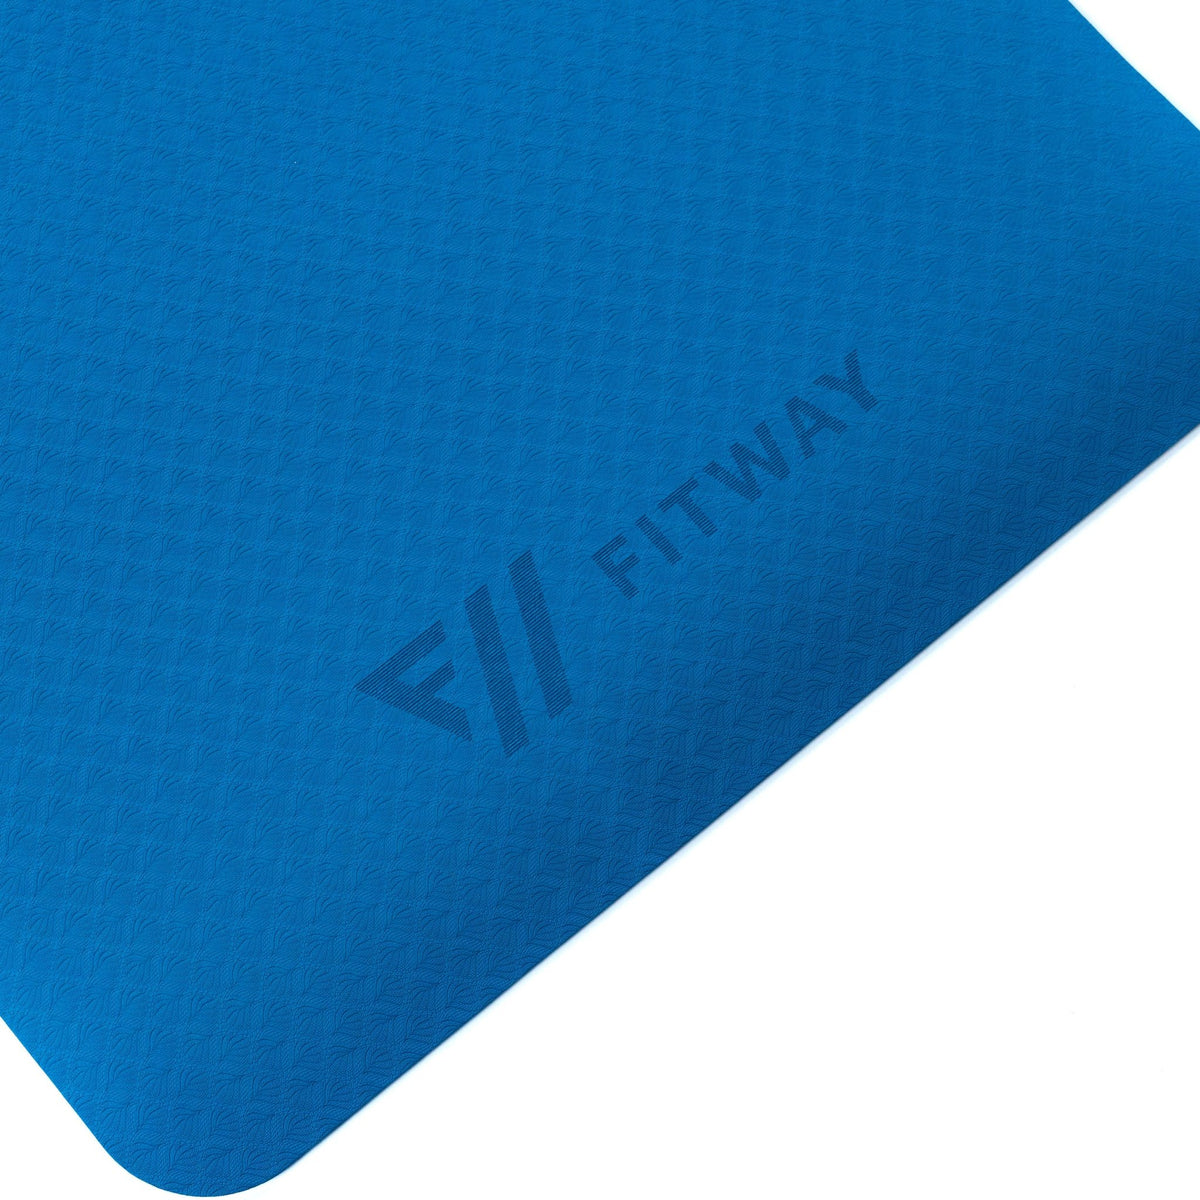 FitWay Equip. Essential Yoga Mat - 6mm - Fitness Experience